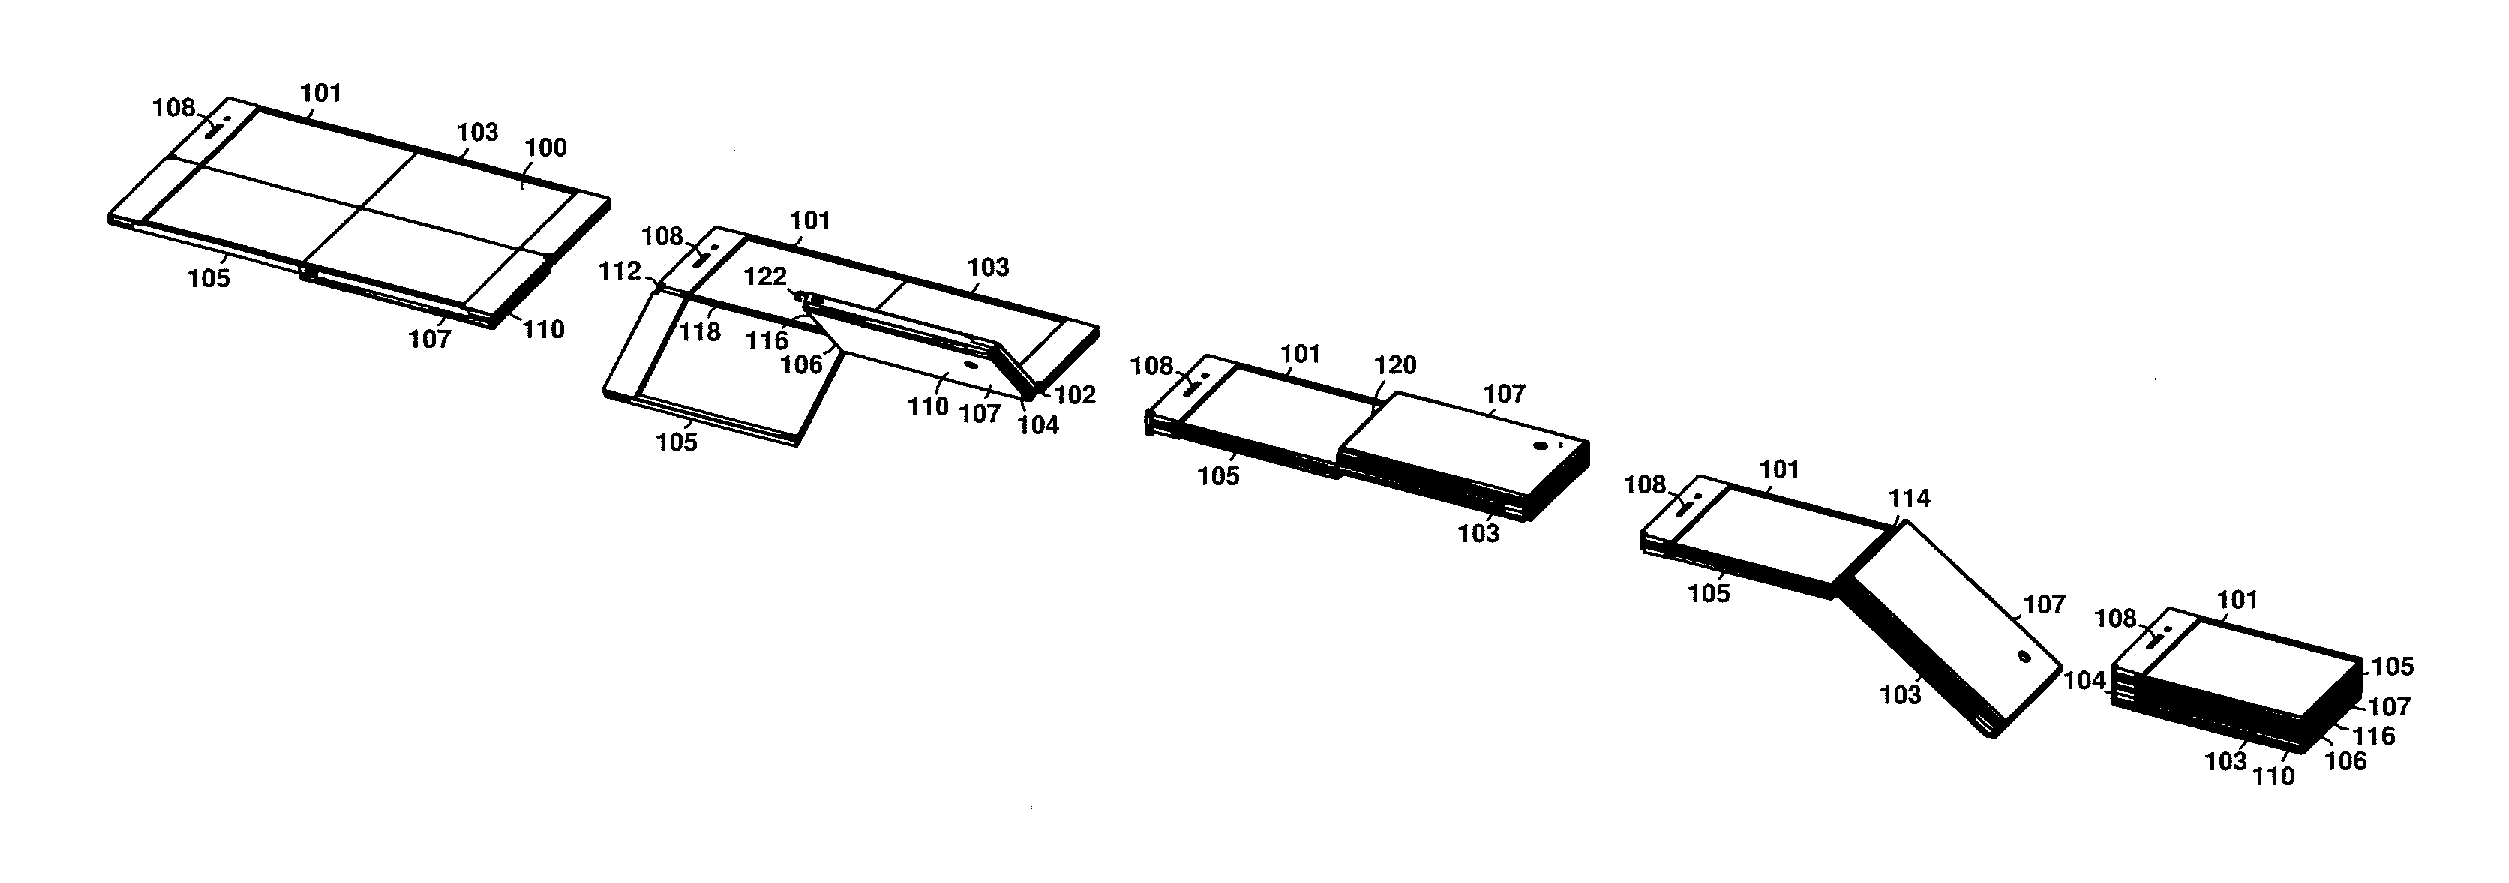 Reconfigurable touch screen computing device